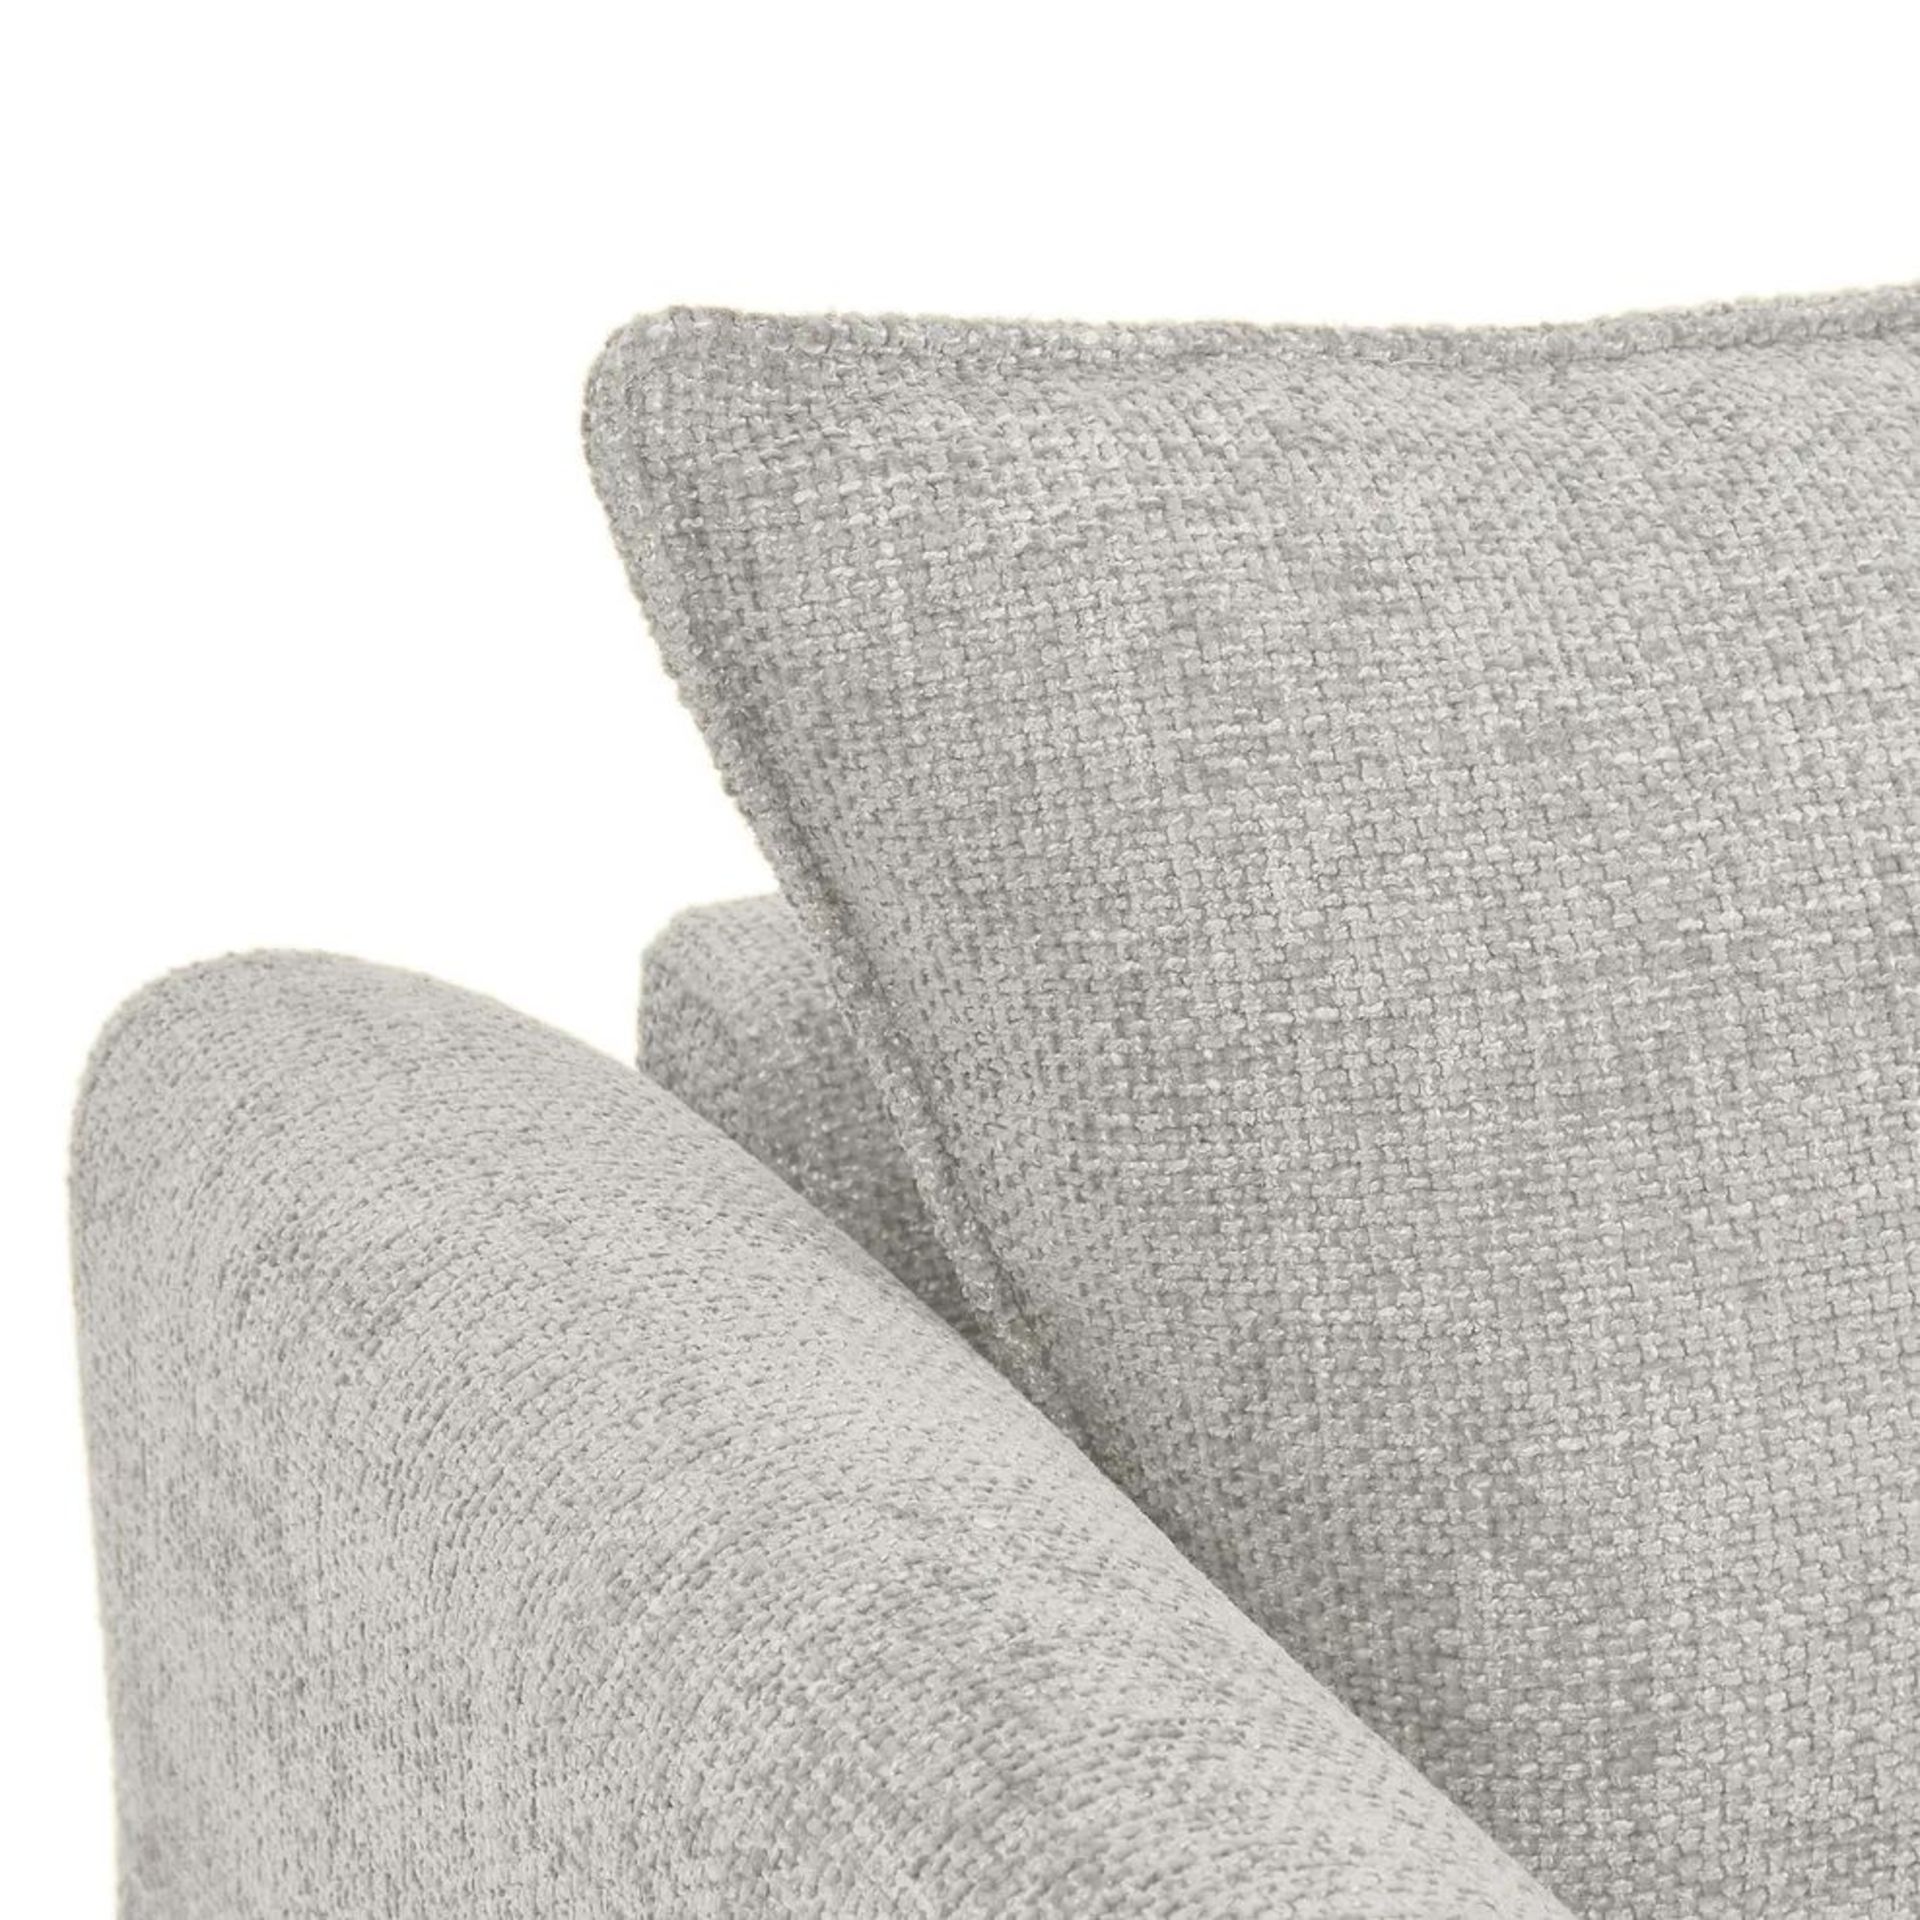 BRAND NEW DALBY 3 Seater Sofa - SILVER FABRIC. RRP £1679. Our Dalby 3-seater sofa, shown here in - Image 8 of 8